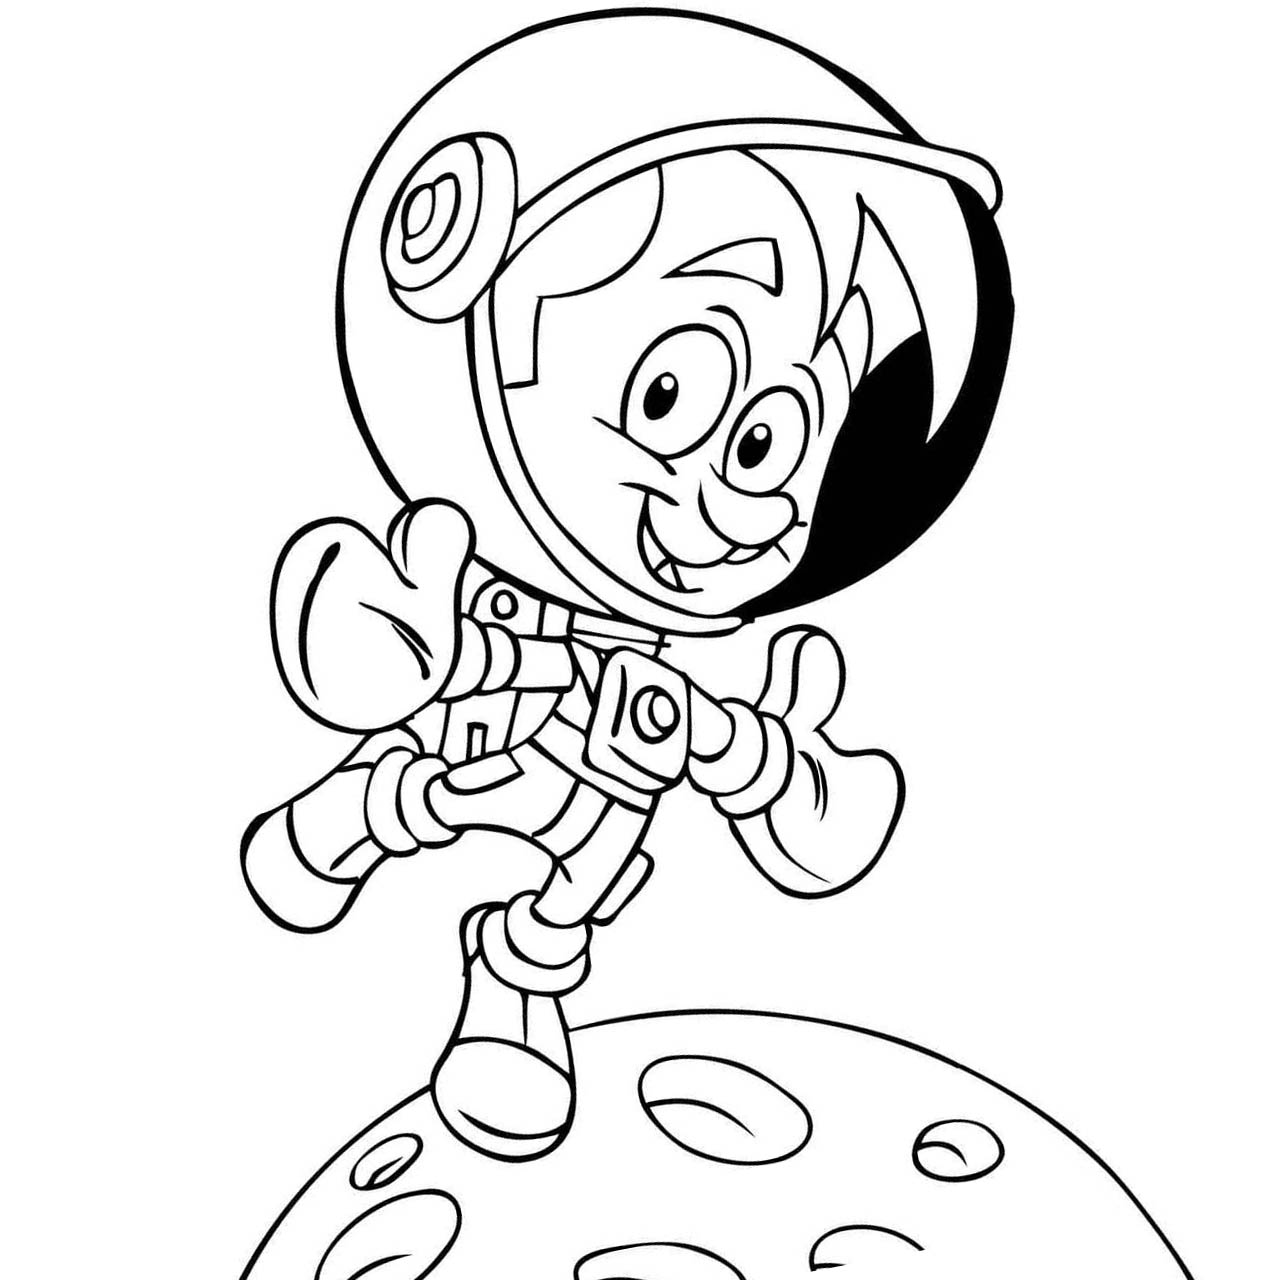 Free Astronaut Jumping On the Planet Coloring Pages printable